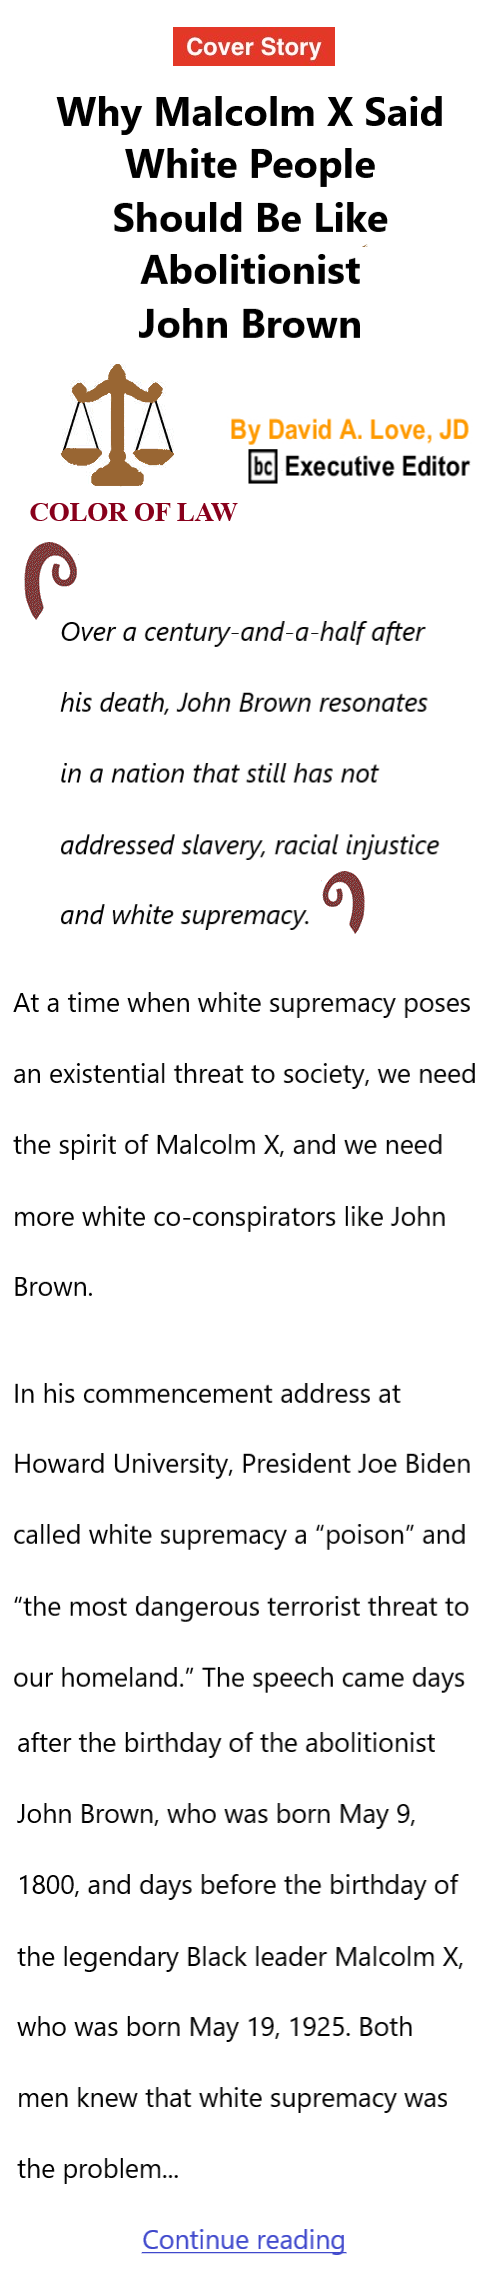 BlackCommentator.com May 25, 2023 - Issue 957: Cover Story - Why Malcolm X Said White People Should Be Like Abolitionist John Brown hy Malcolm X Said White People Should Be Like Abolitionist John Brown, Color of Law By David A. Love, JD, BC Executive Editor